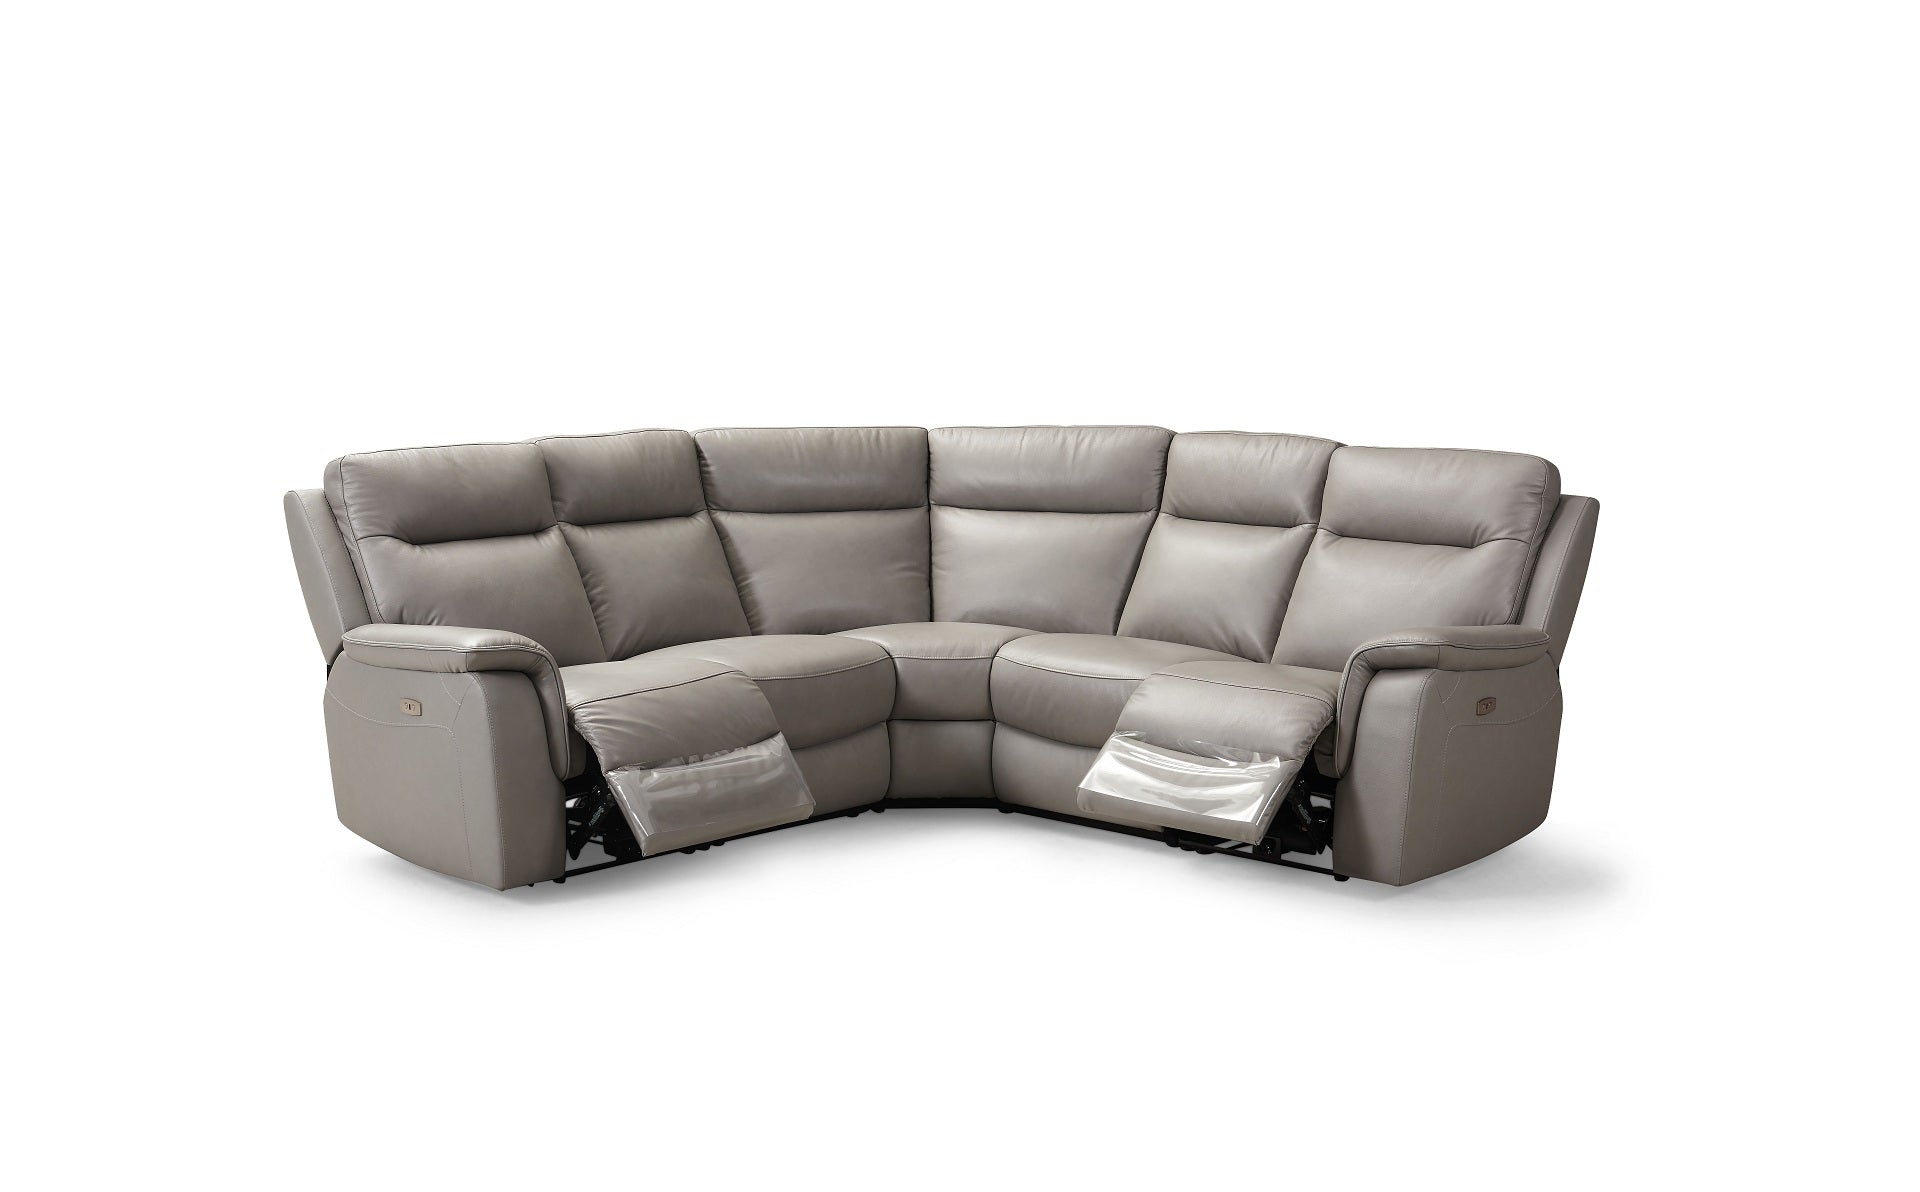 Hanna Leather Electric Recliner Corner Group - Grey